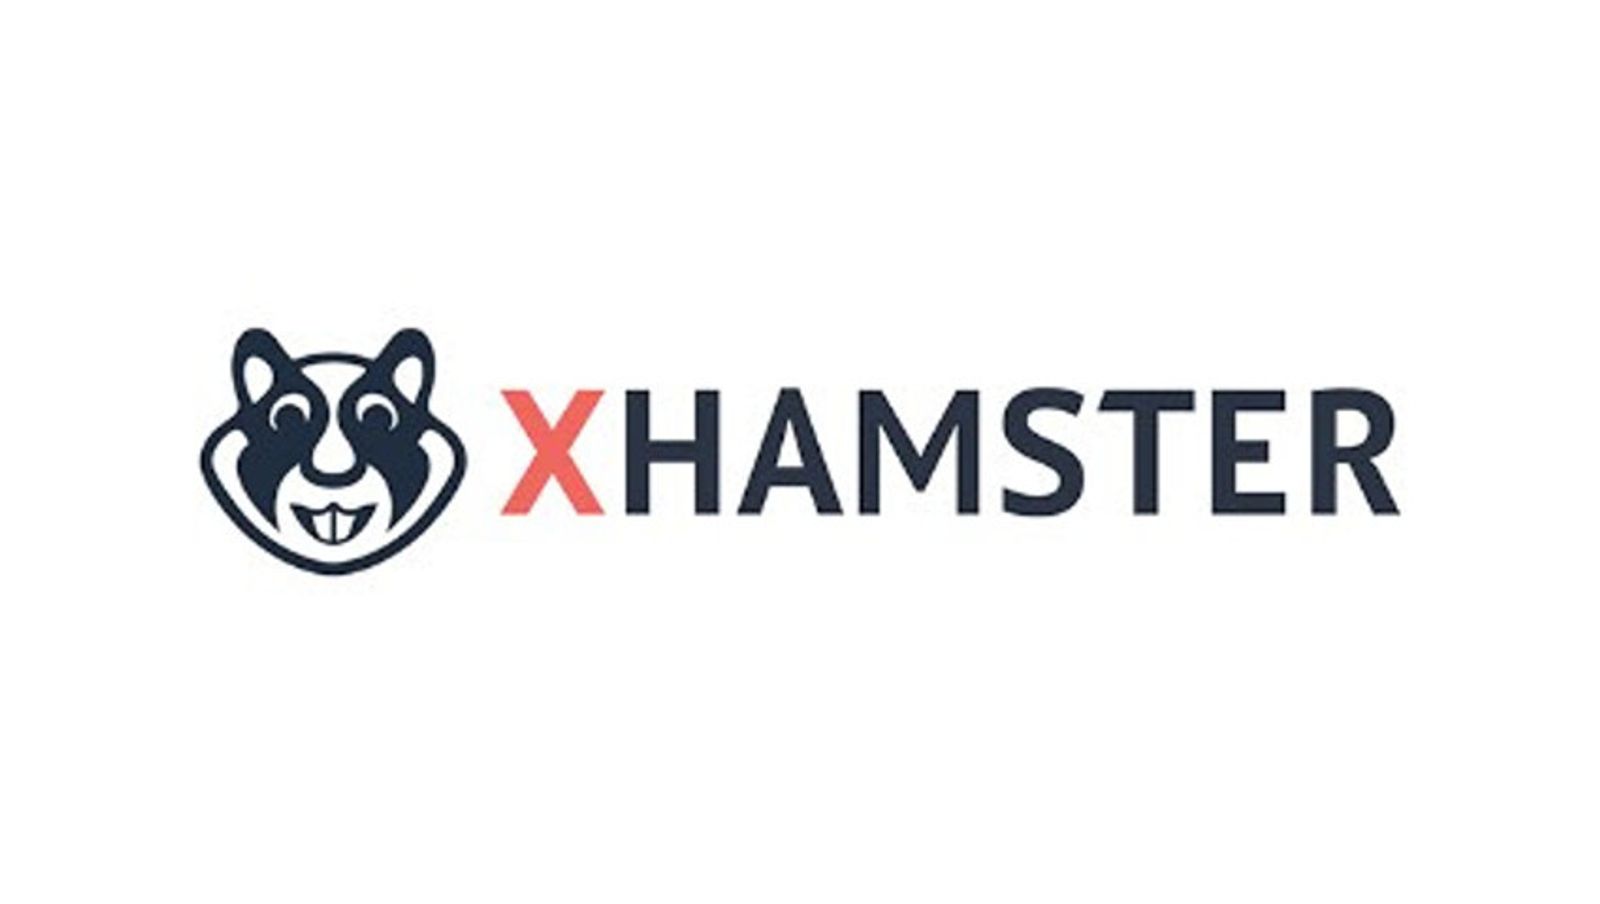 xHamster Releases Annual Halloween Trend Report